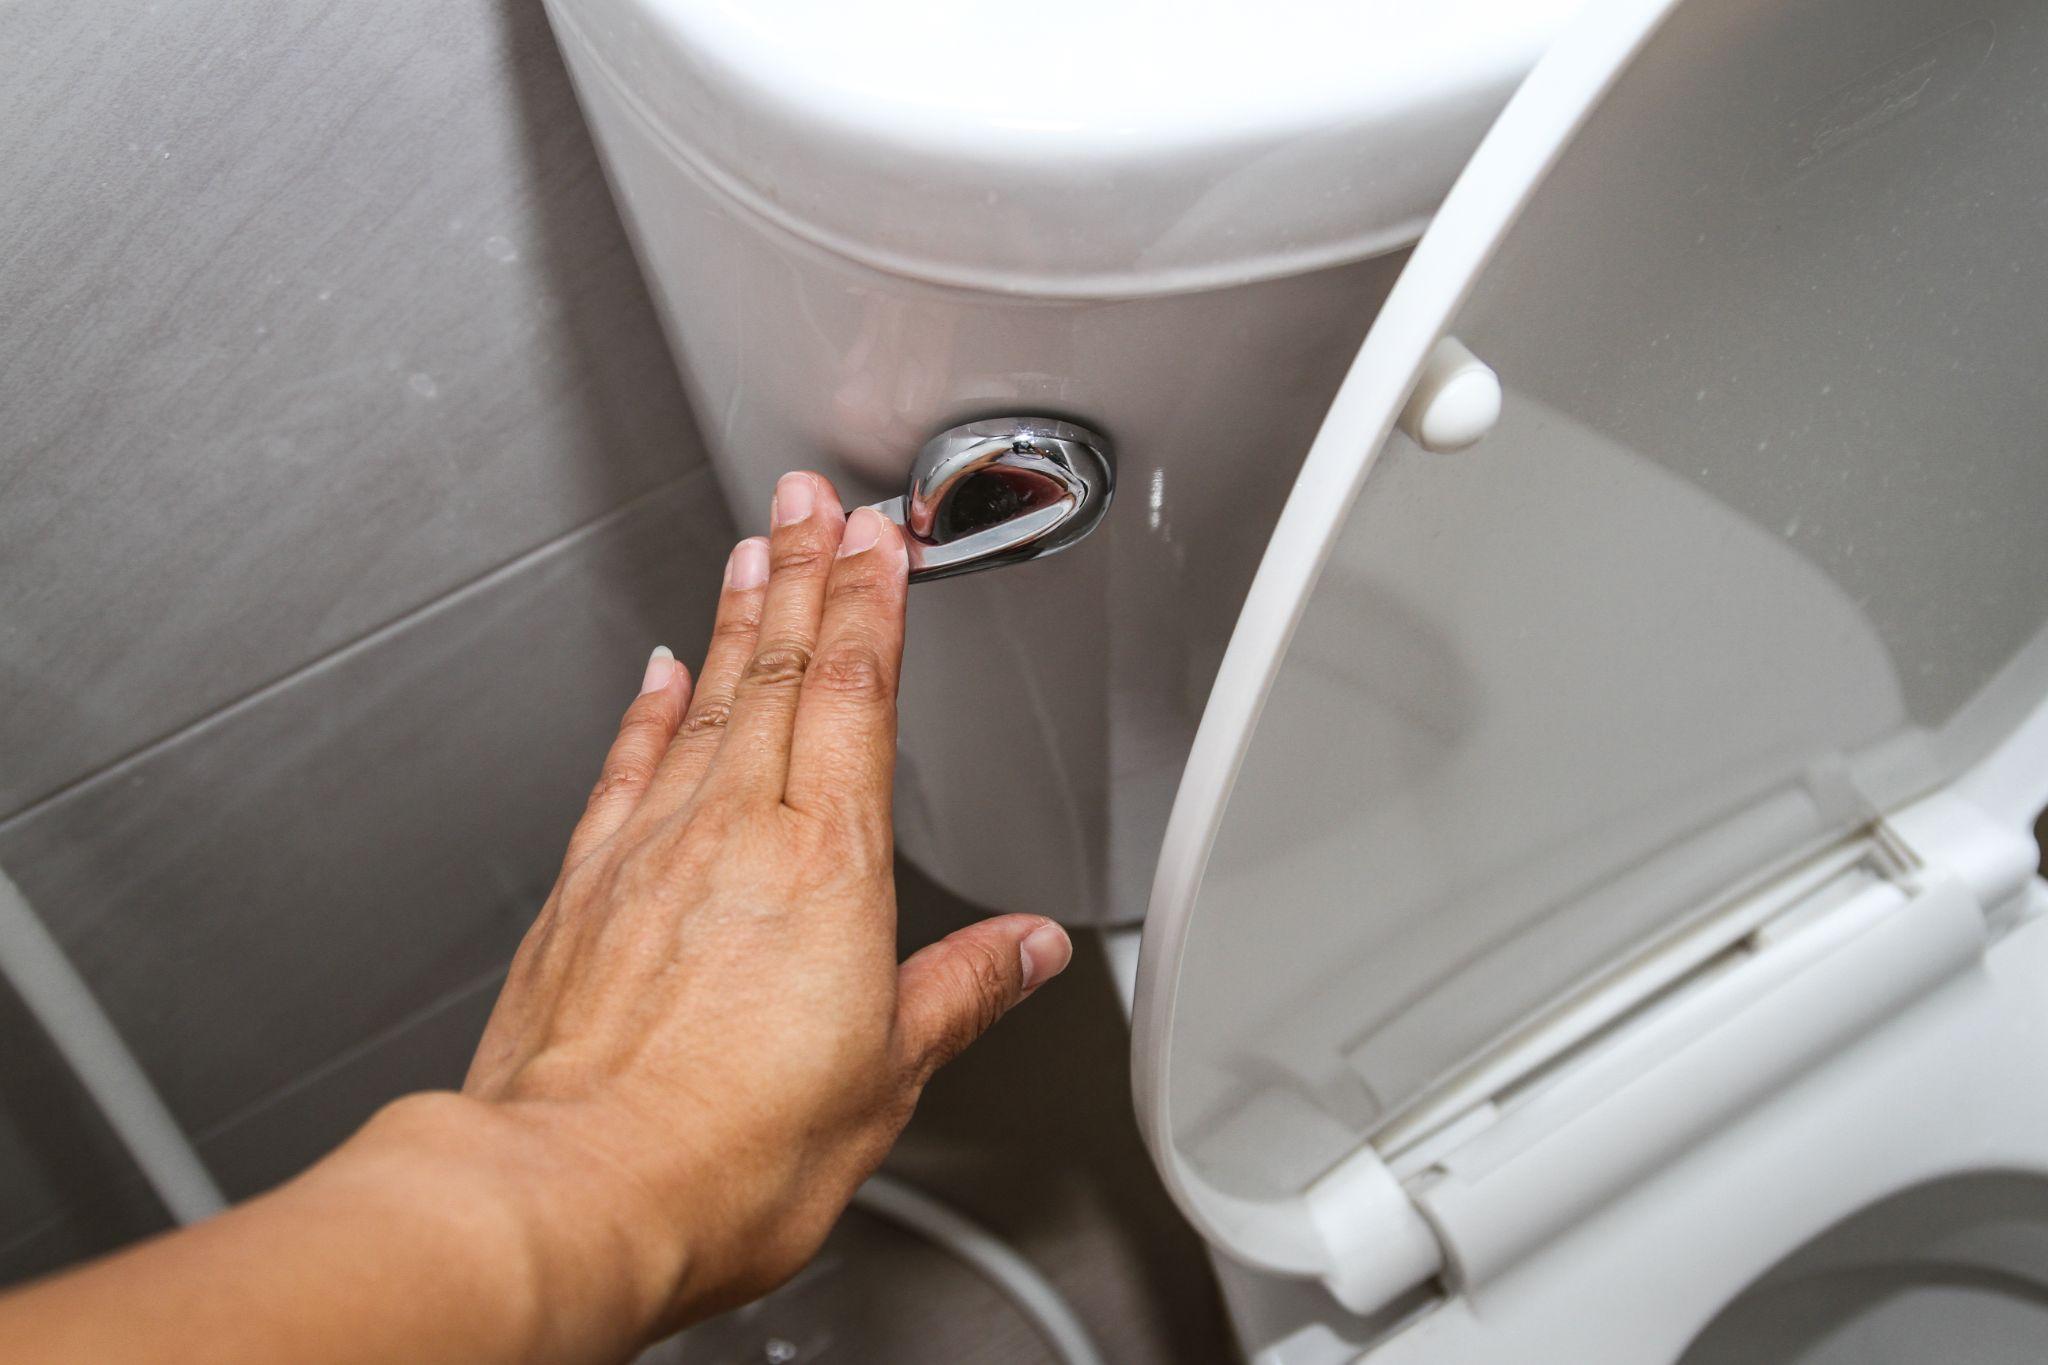 Causes of a Weak Flushing Toilet and How to Fix It